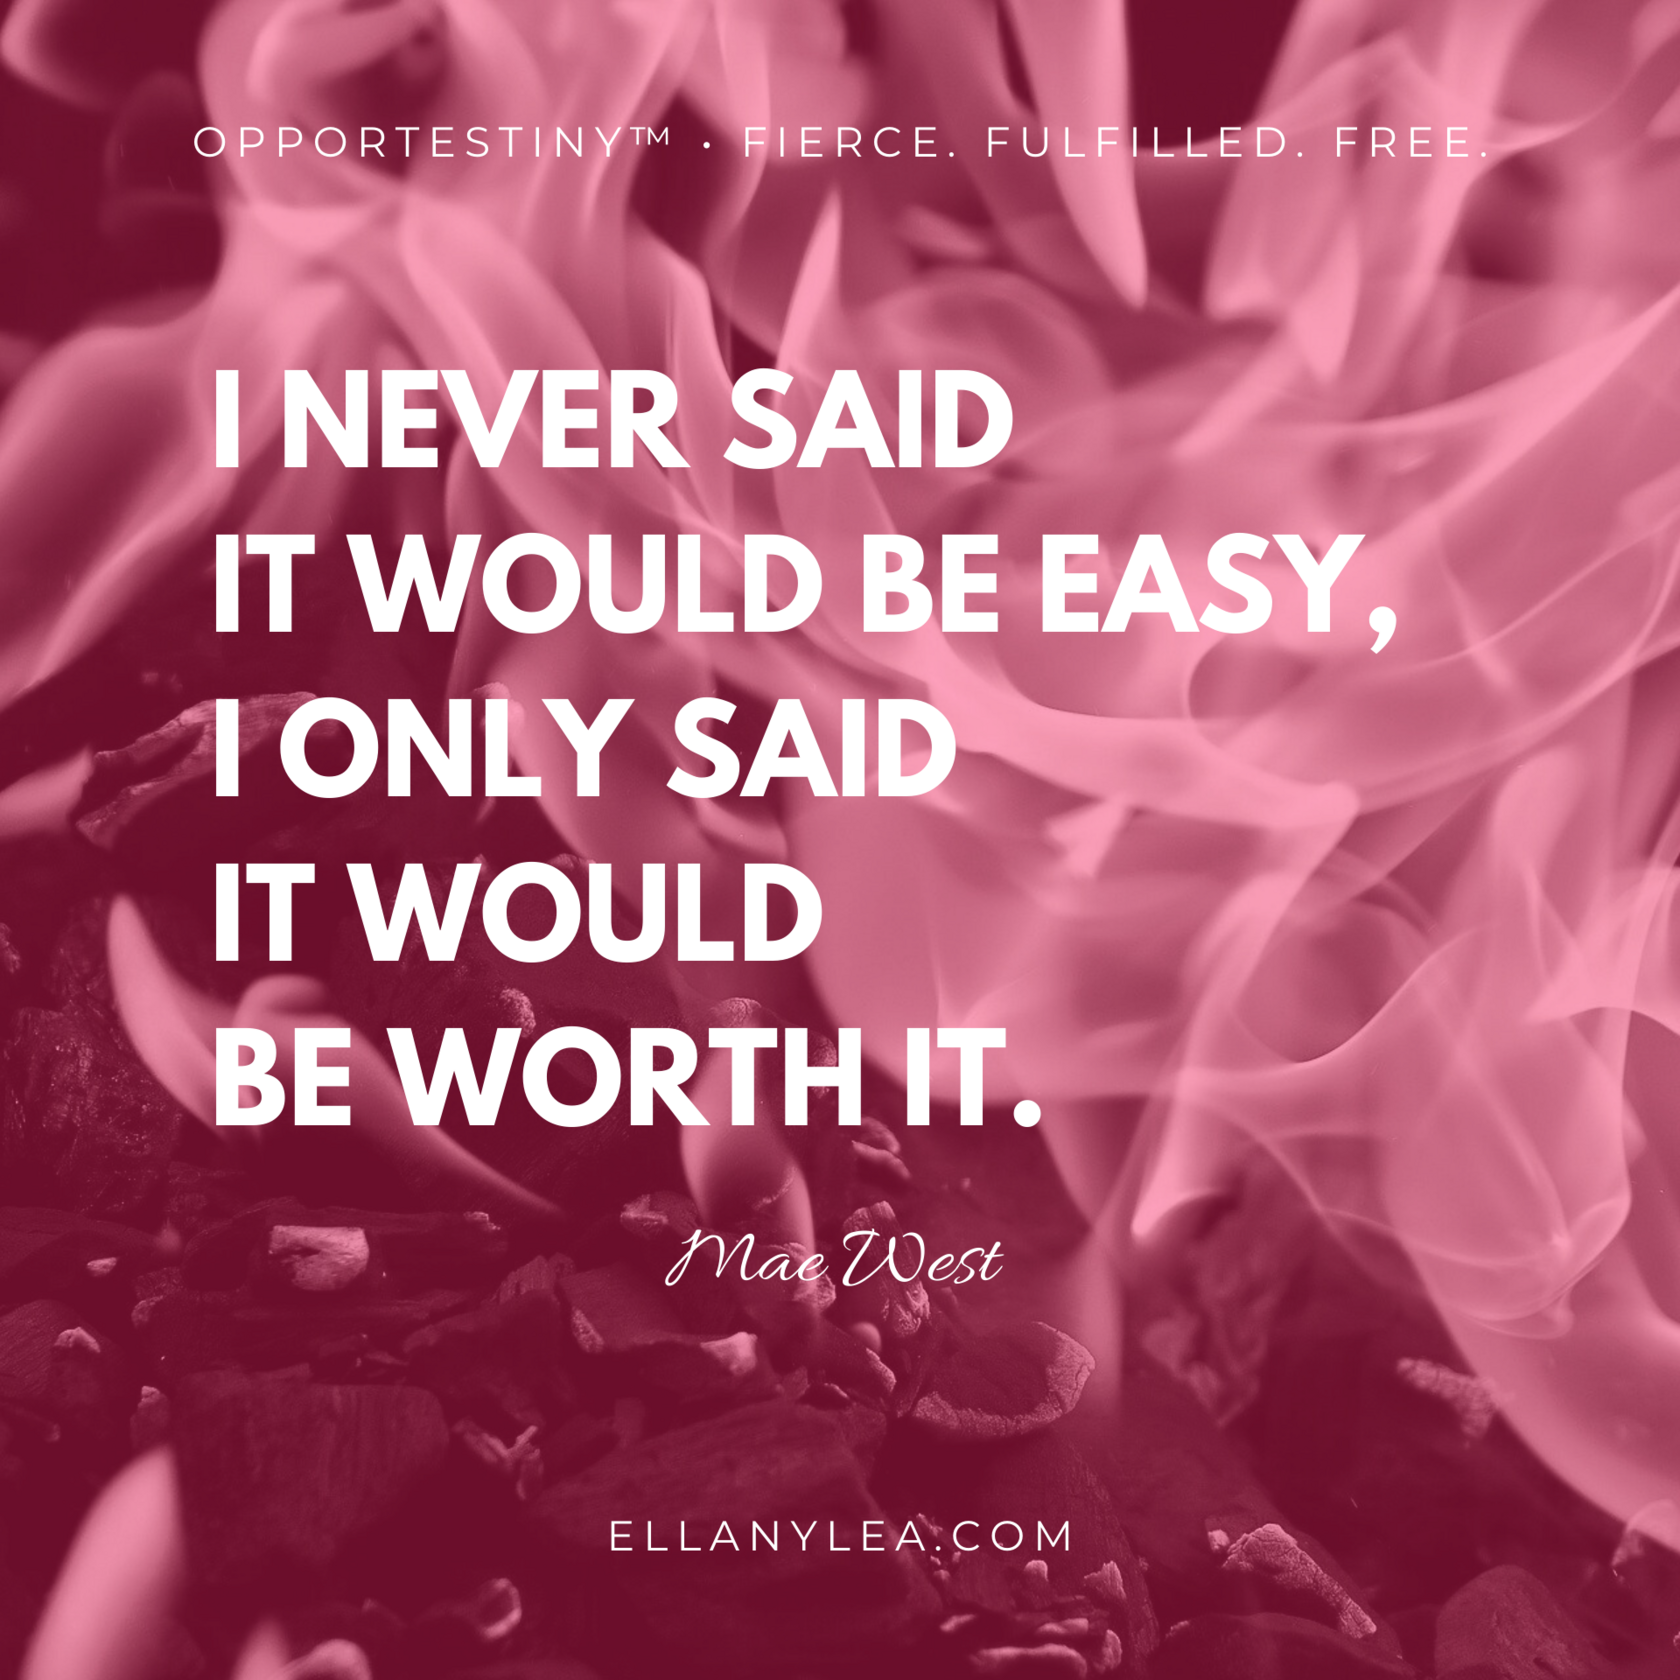 quote - not easy worth it